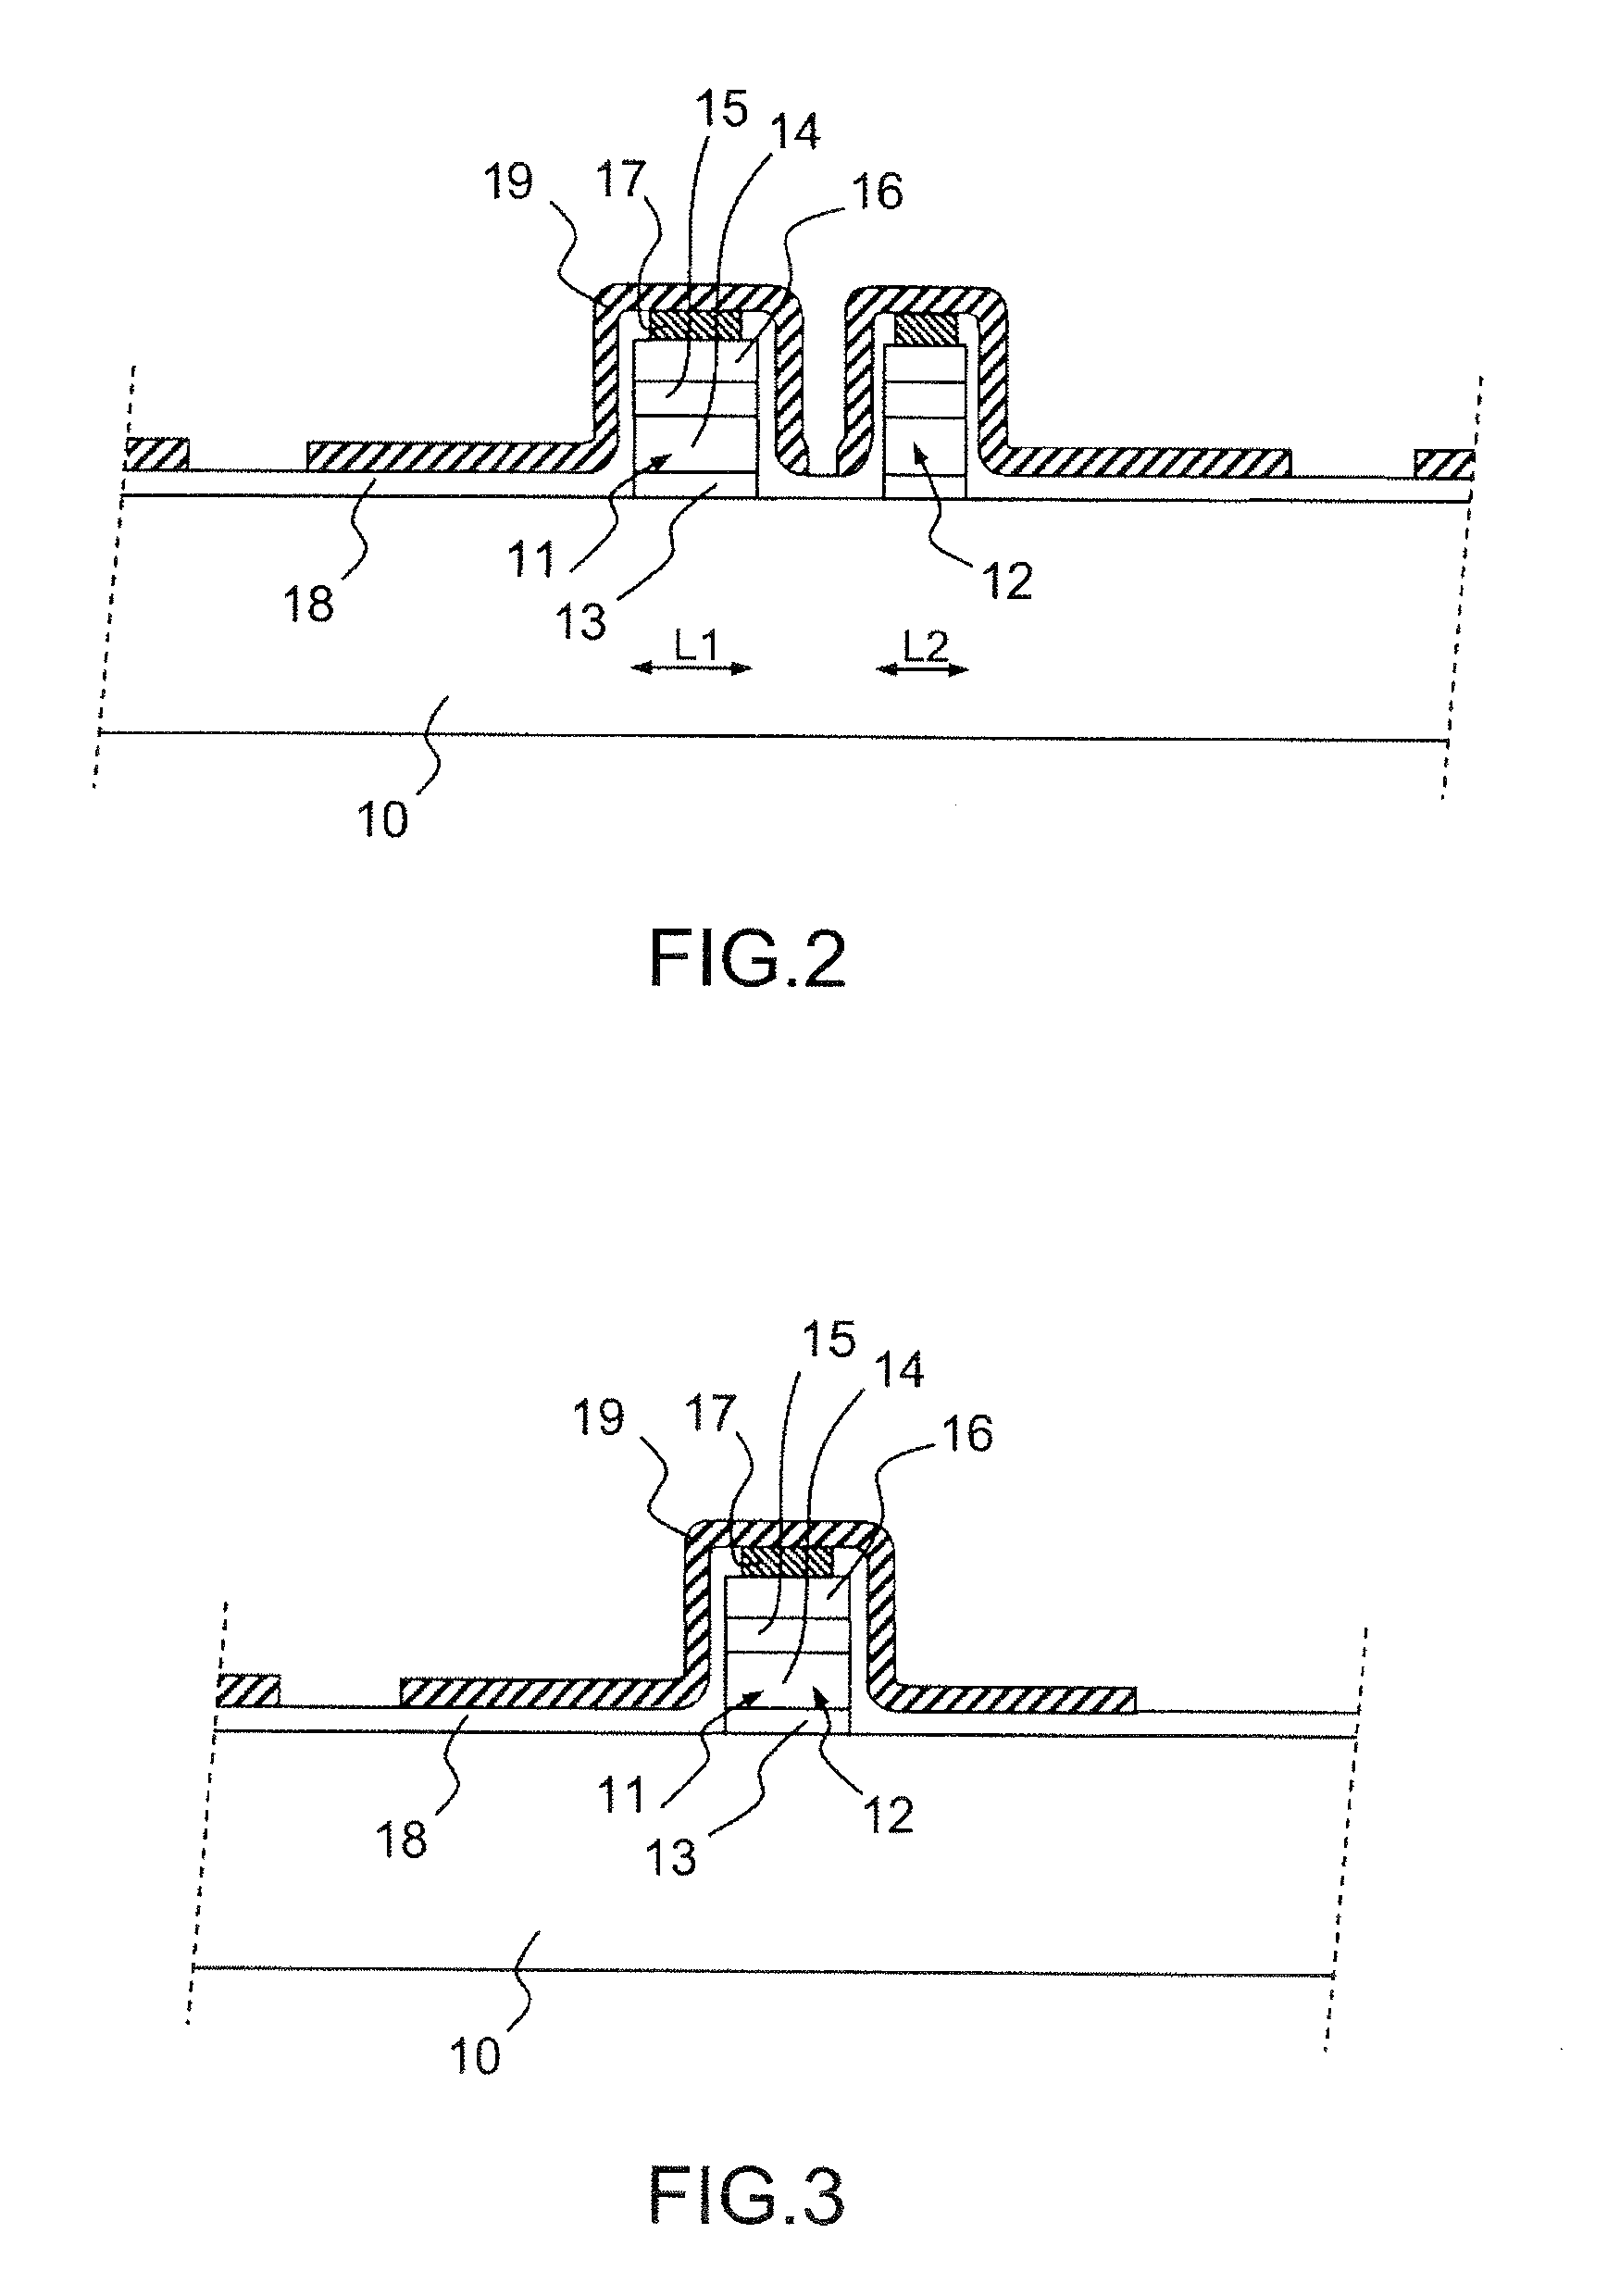 Method of fabricating an optical analysis device comprising a quantum cascade laser and a quantum detector